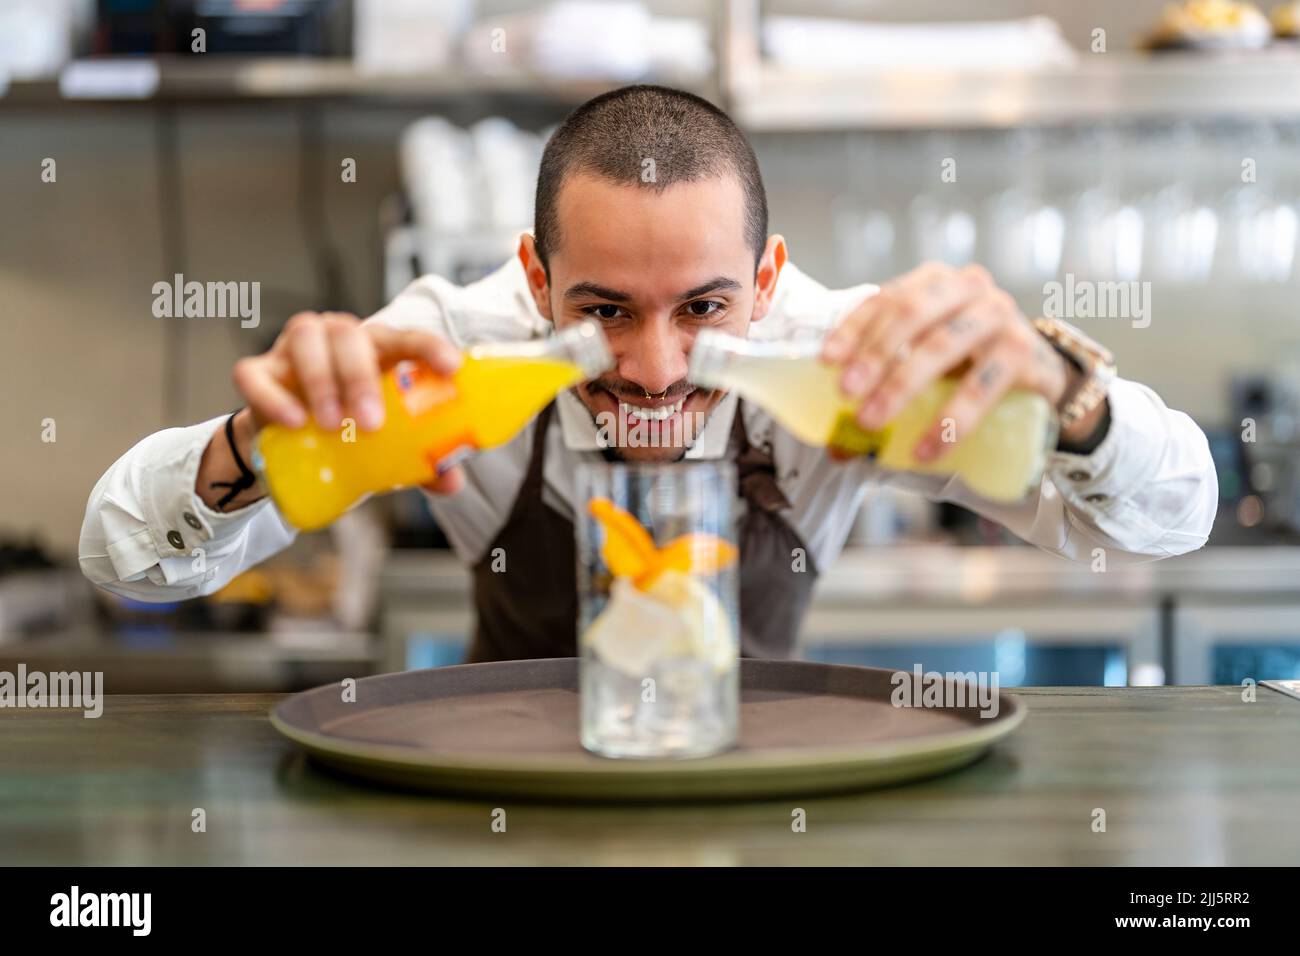 Smiling bartender pouring drink in glass Stock Photo